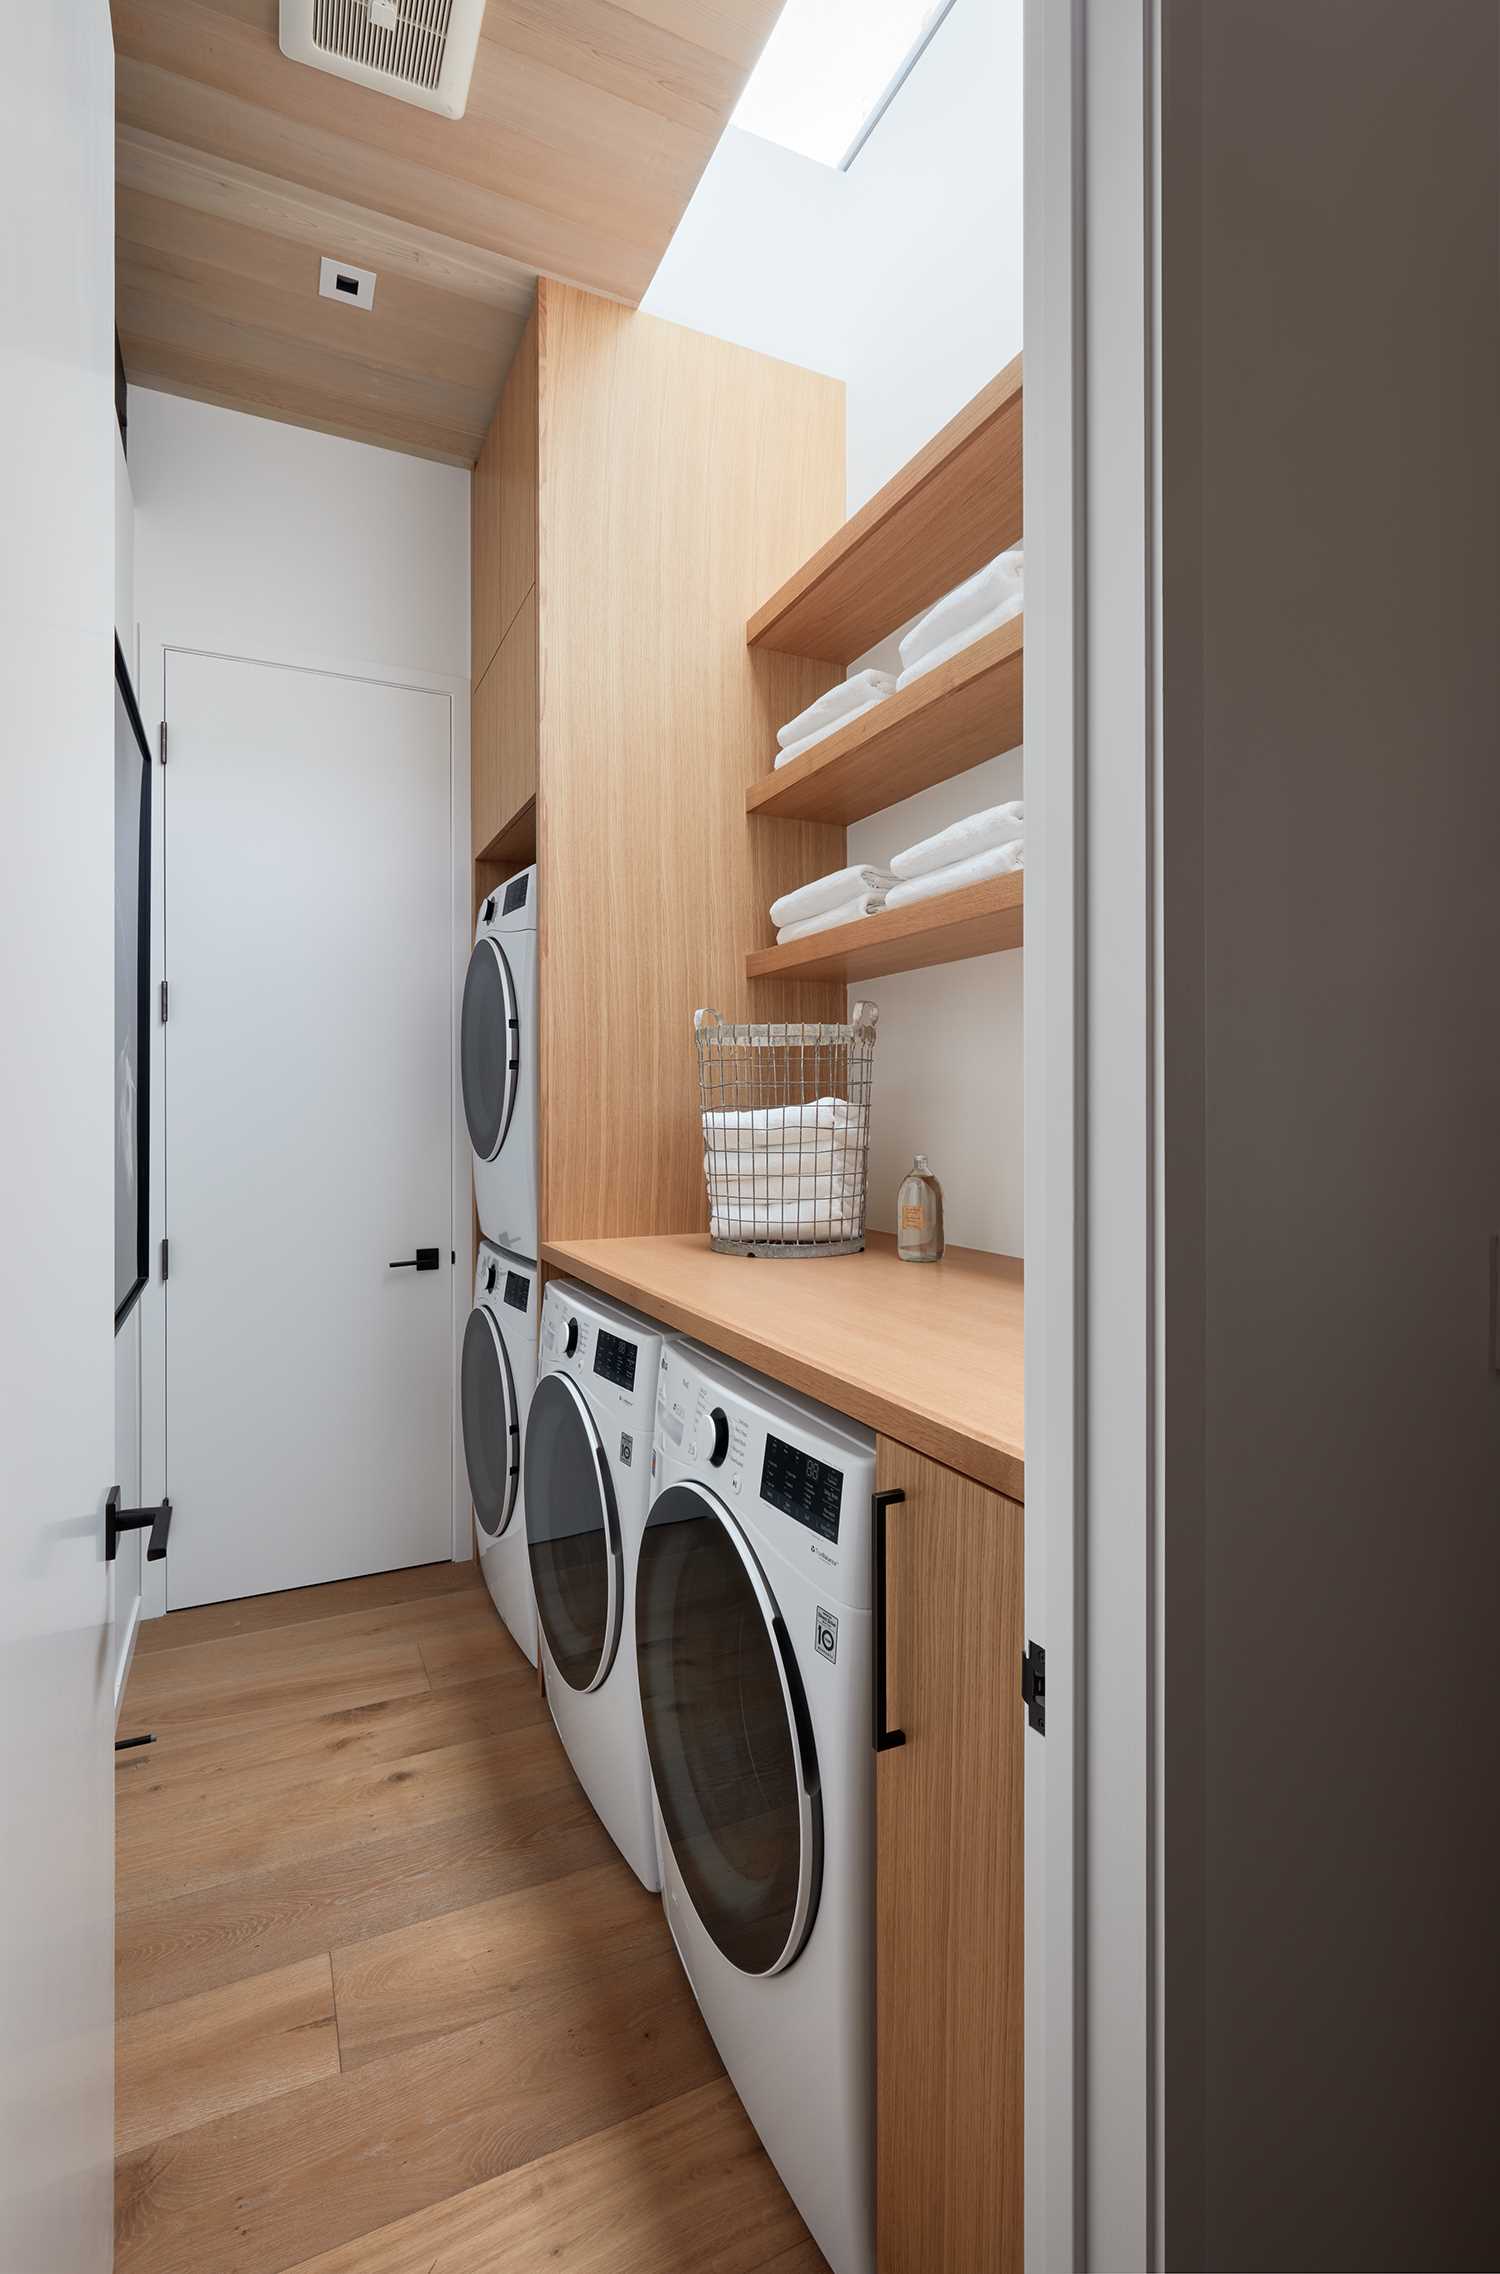 In this modern laundry room, there's custom cabinetry and a skylight.